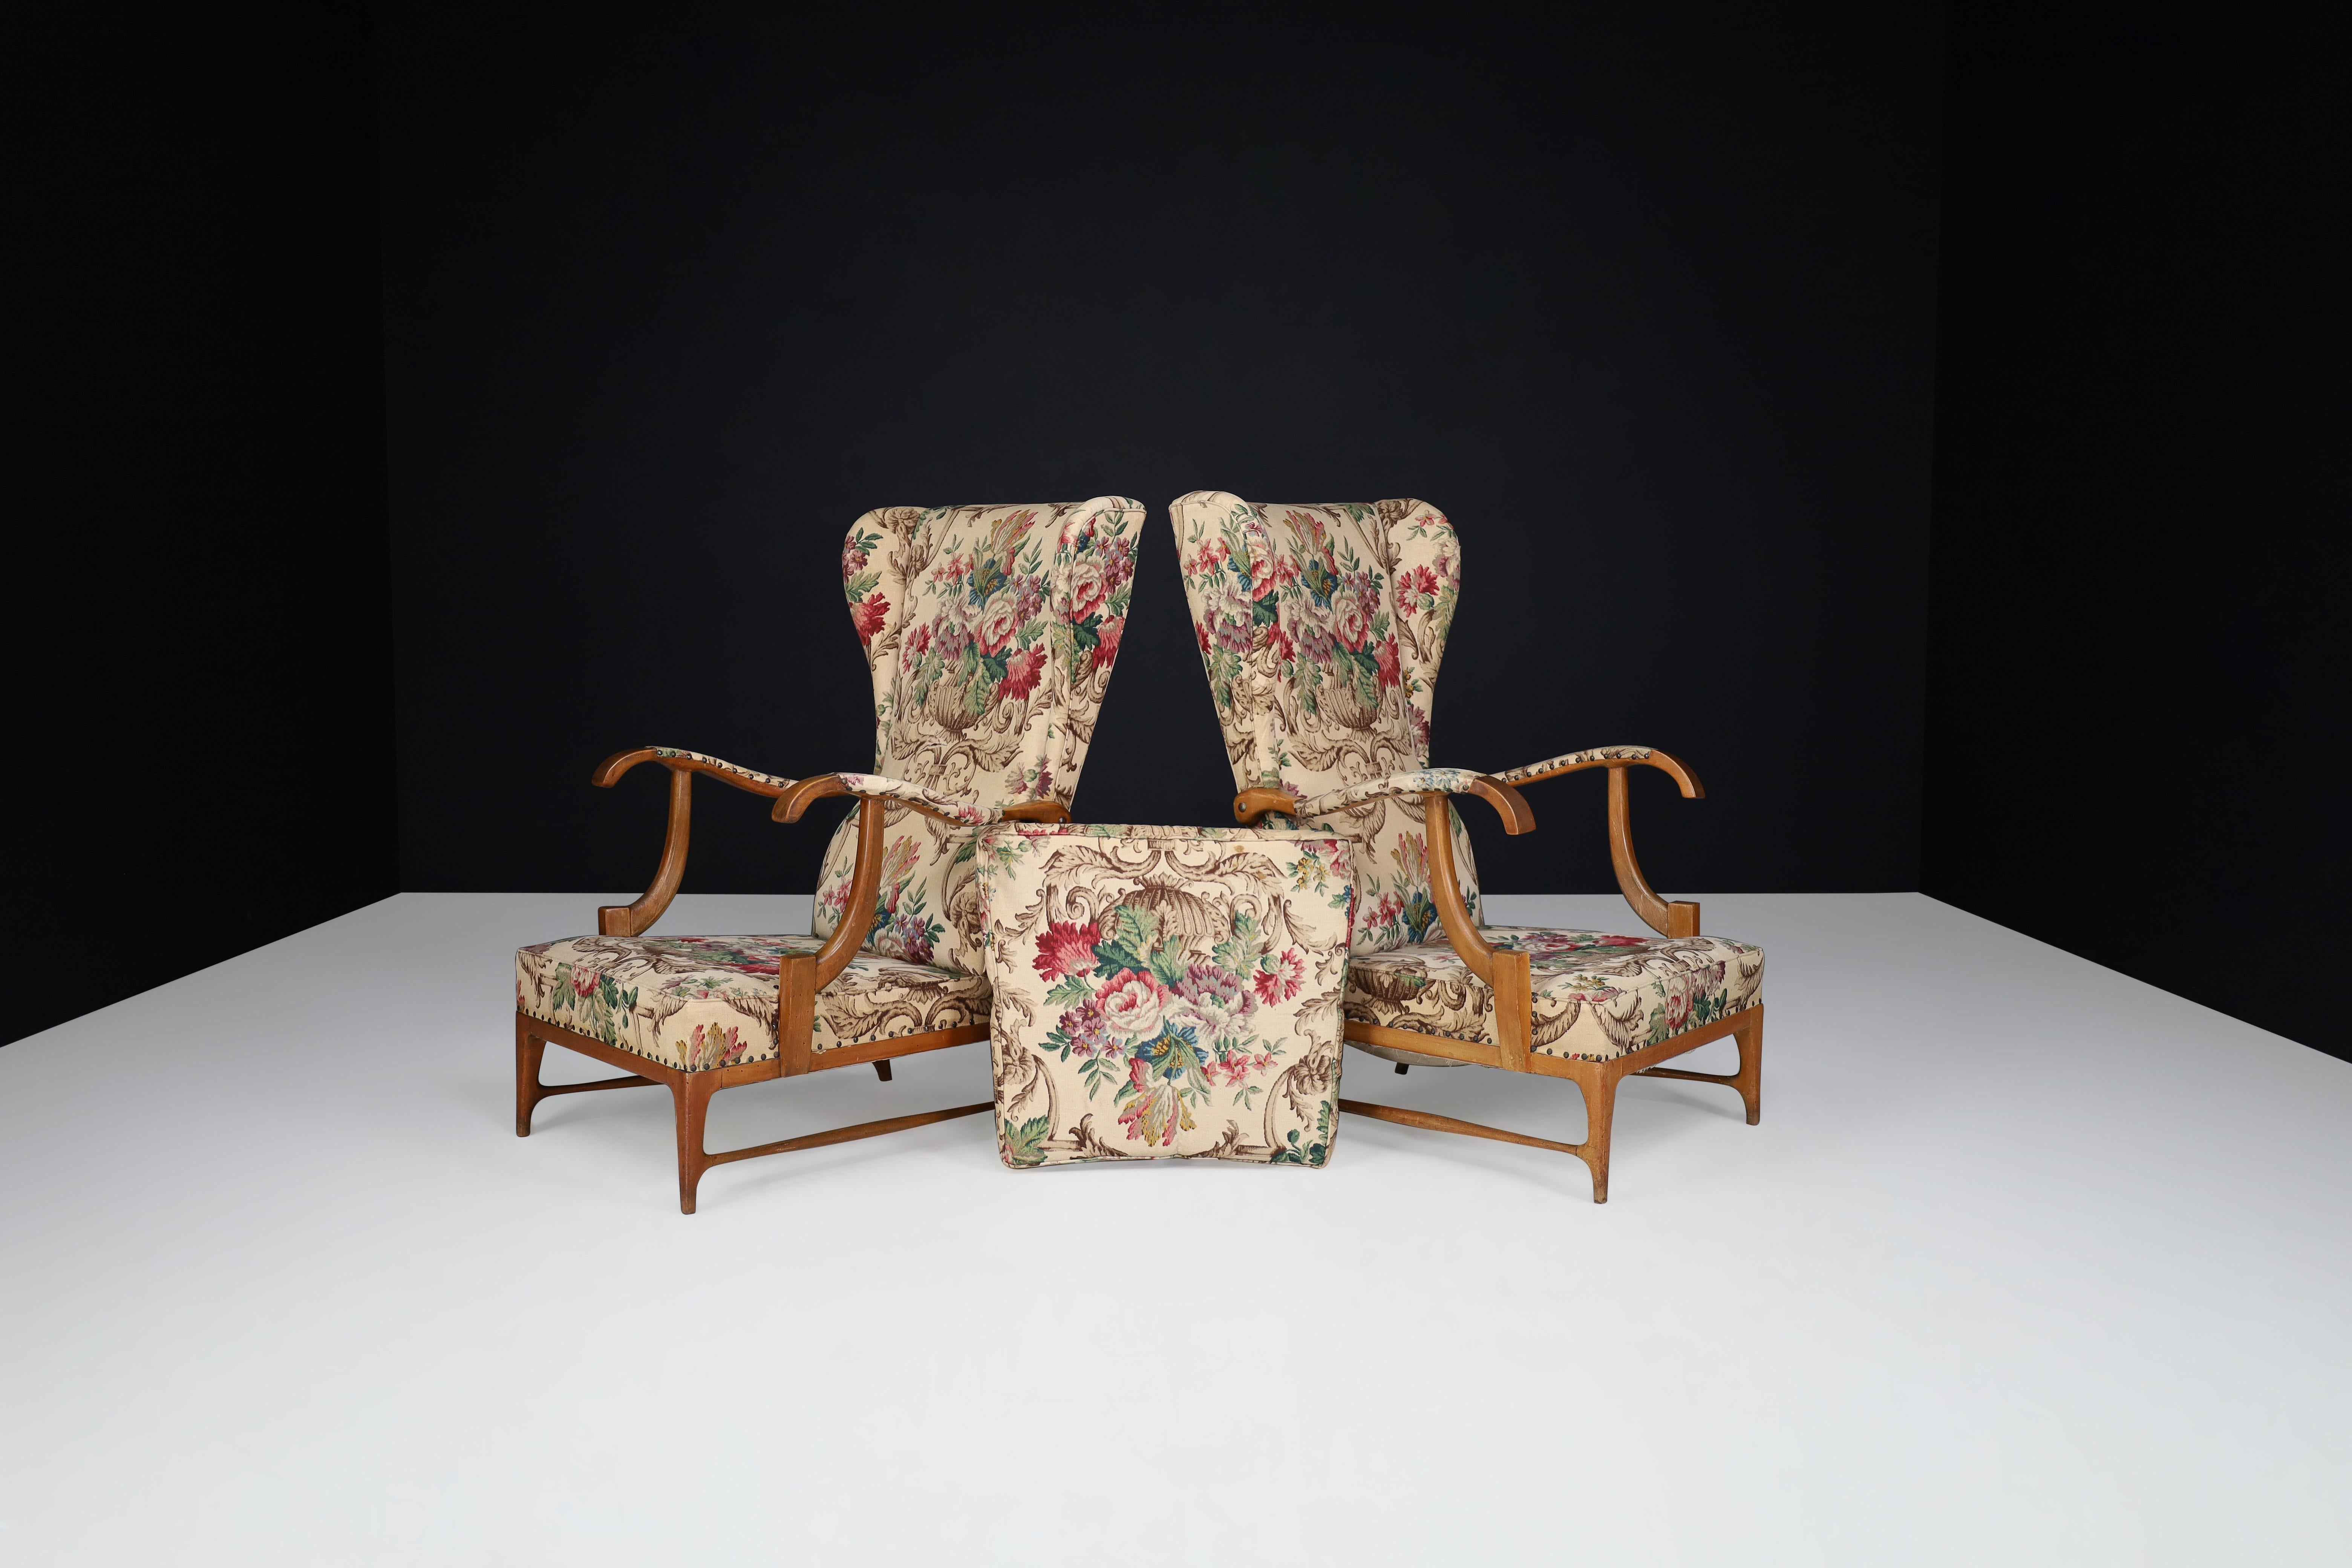 Paolo Buffa high-back armchairs with floral upholstery, Italy, 1940s

Paolo Buffa high-back armchairs with floral upholstery, Italy, 1940s. These armchairs are featured with the original floral fabric and have lovely Italian walnut wood details.